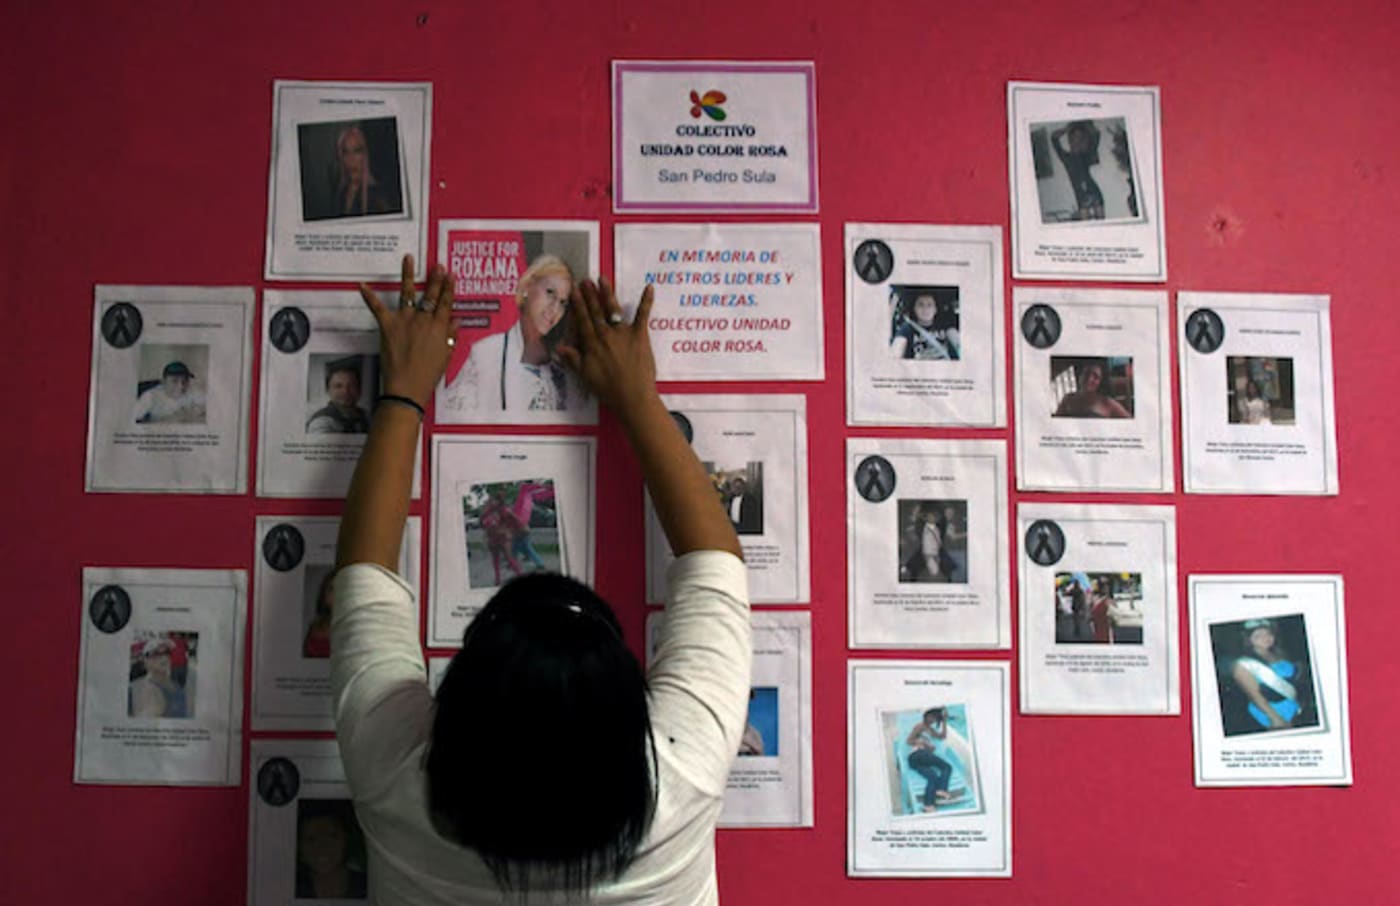 A member of the Pink Unity Collective places a poster on a board, demanding justice.